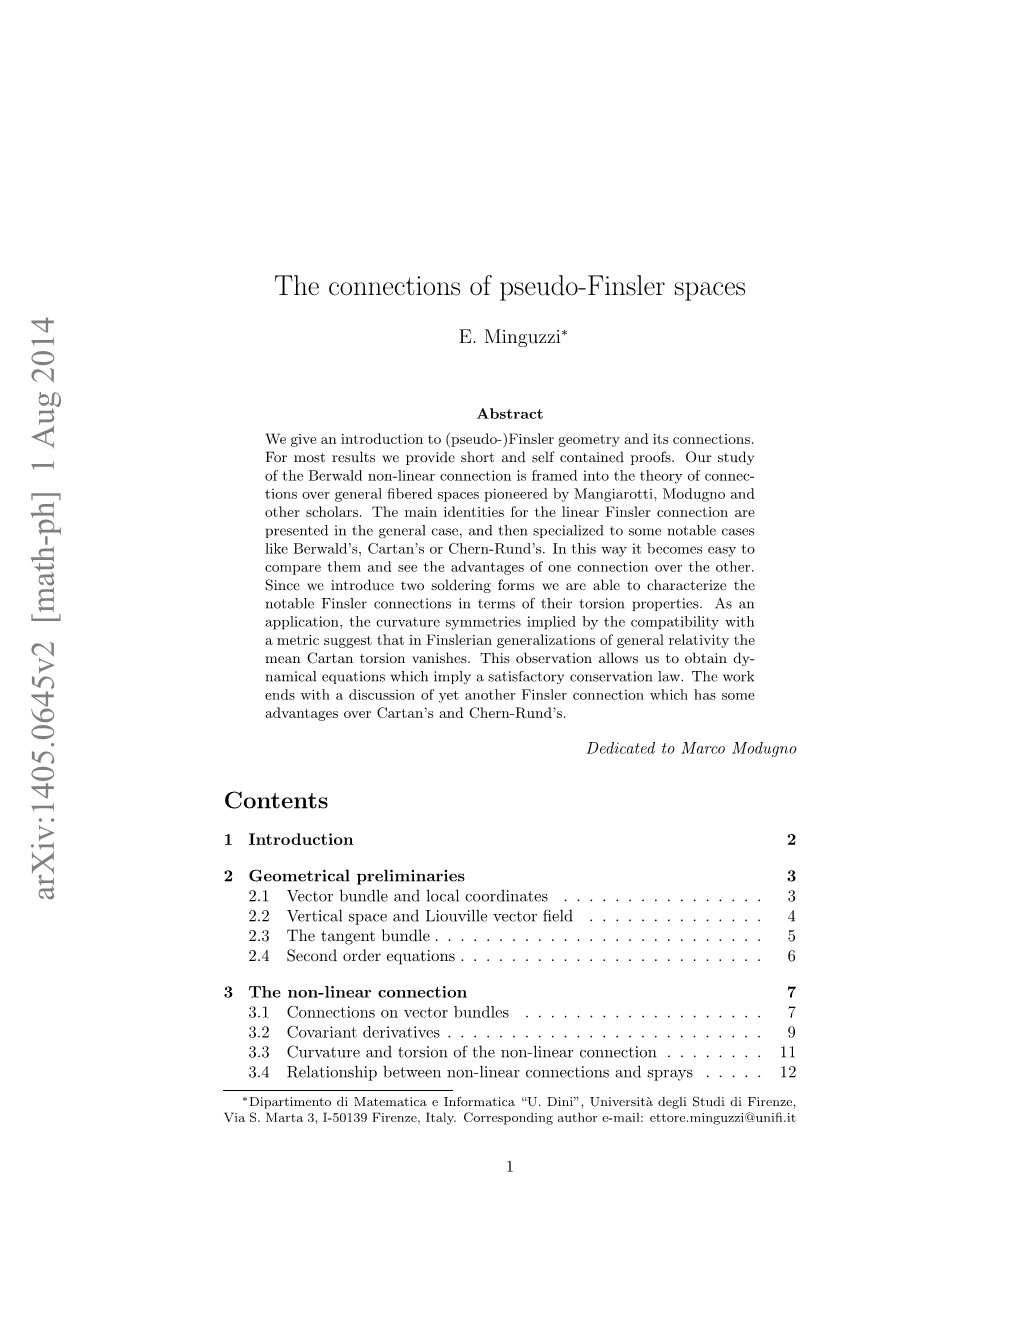 The Connections of Pseudo-Finsler Spaces